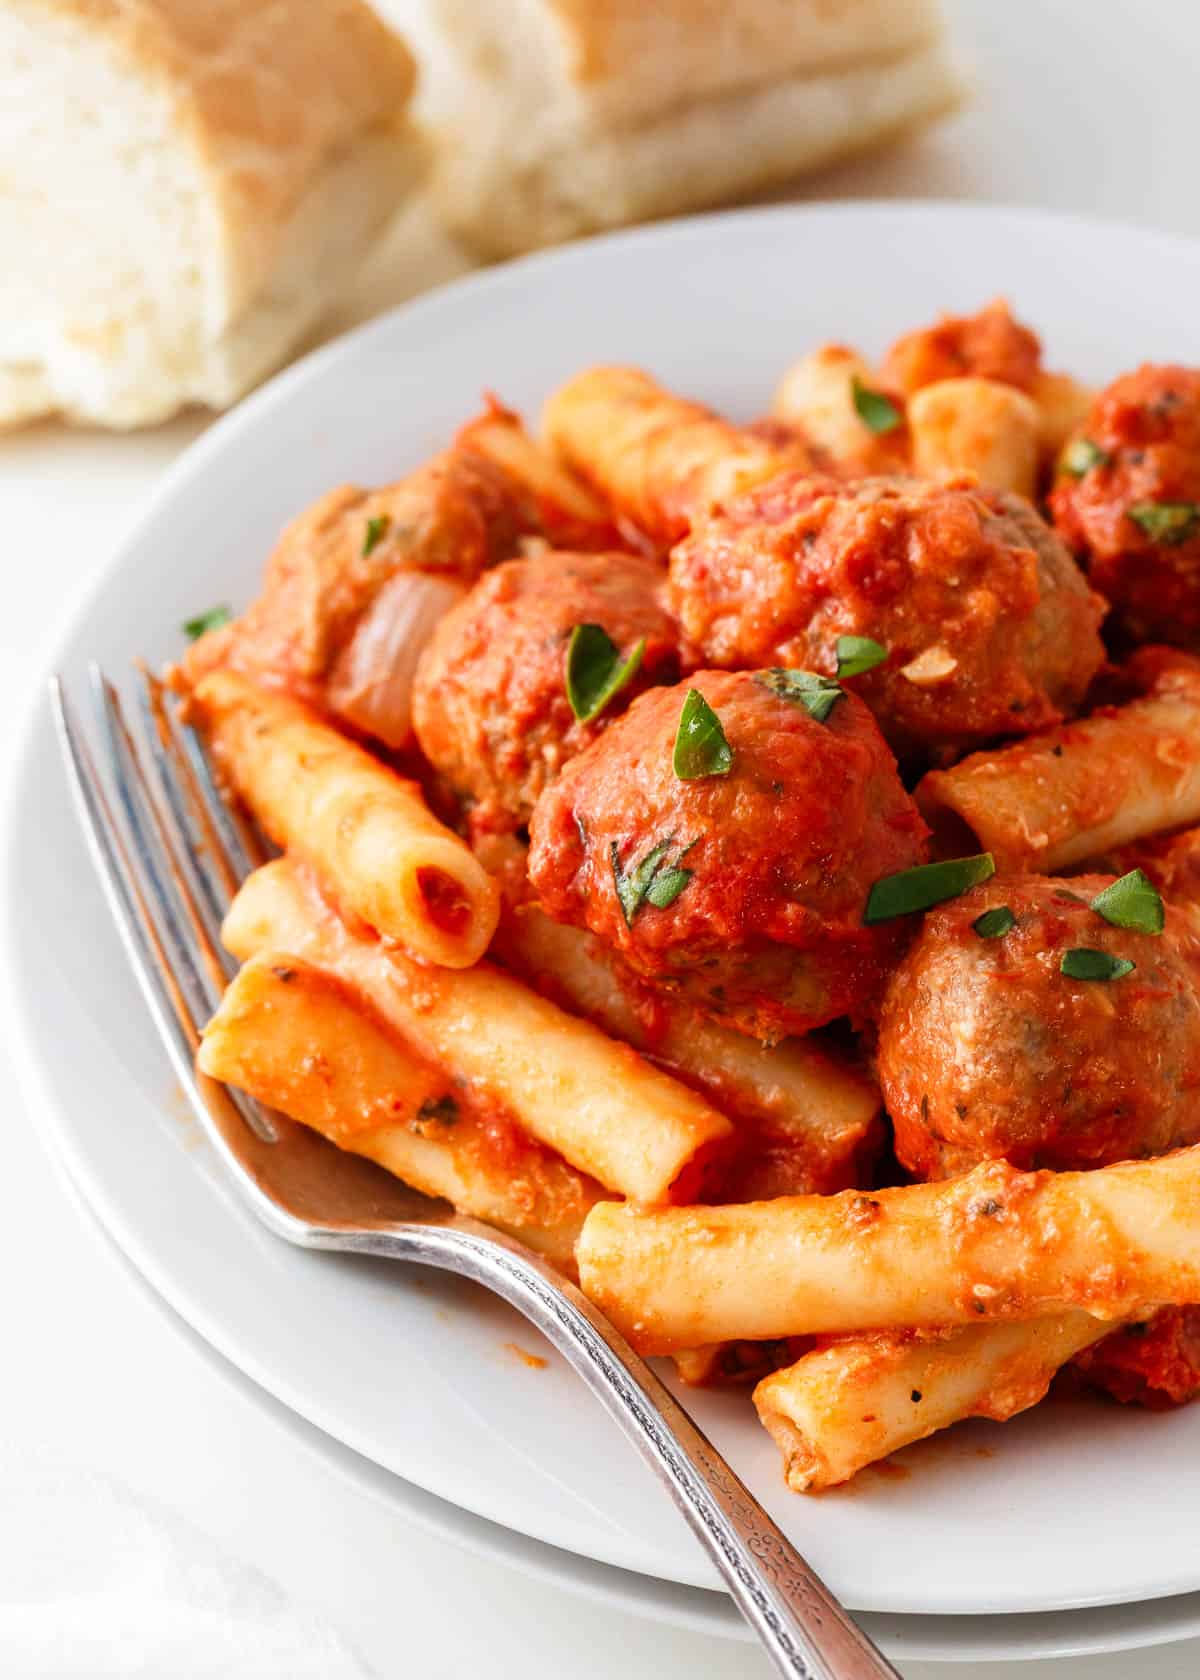 Baked ziti with meatballs on a plate.